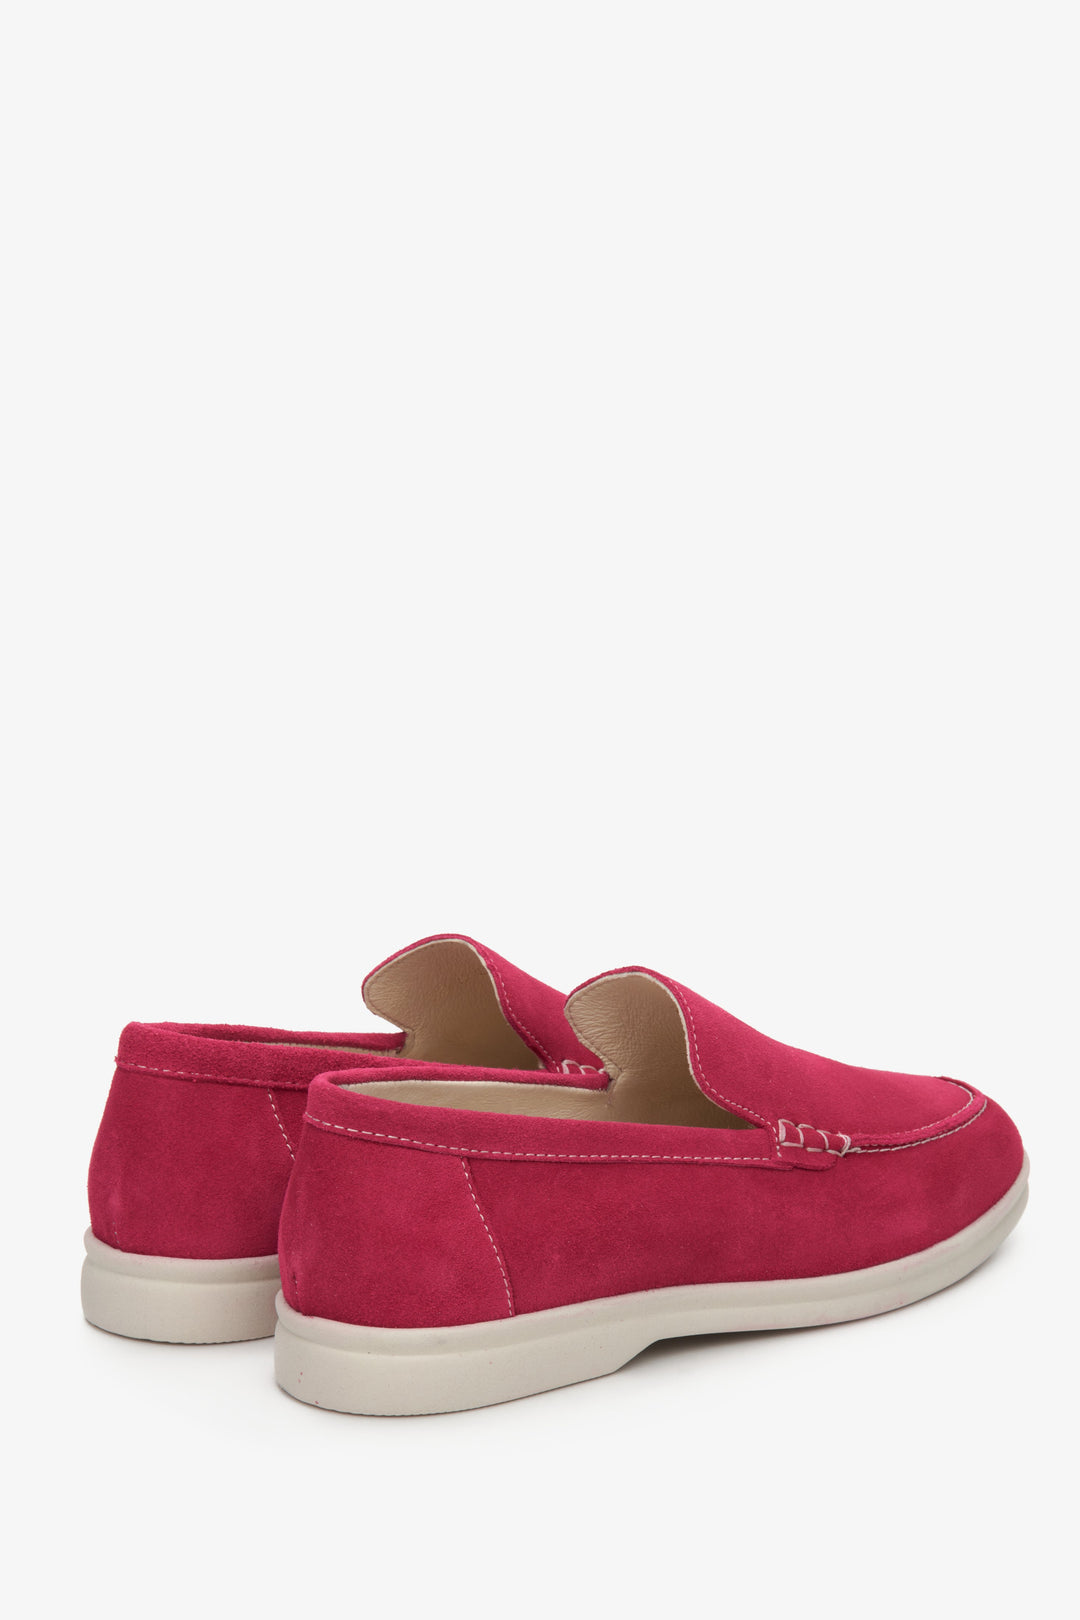 Women's suede moccasins in pink Estro - close-up of the heel and side seam of the shoes.